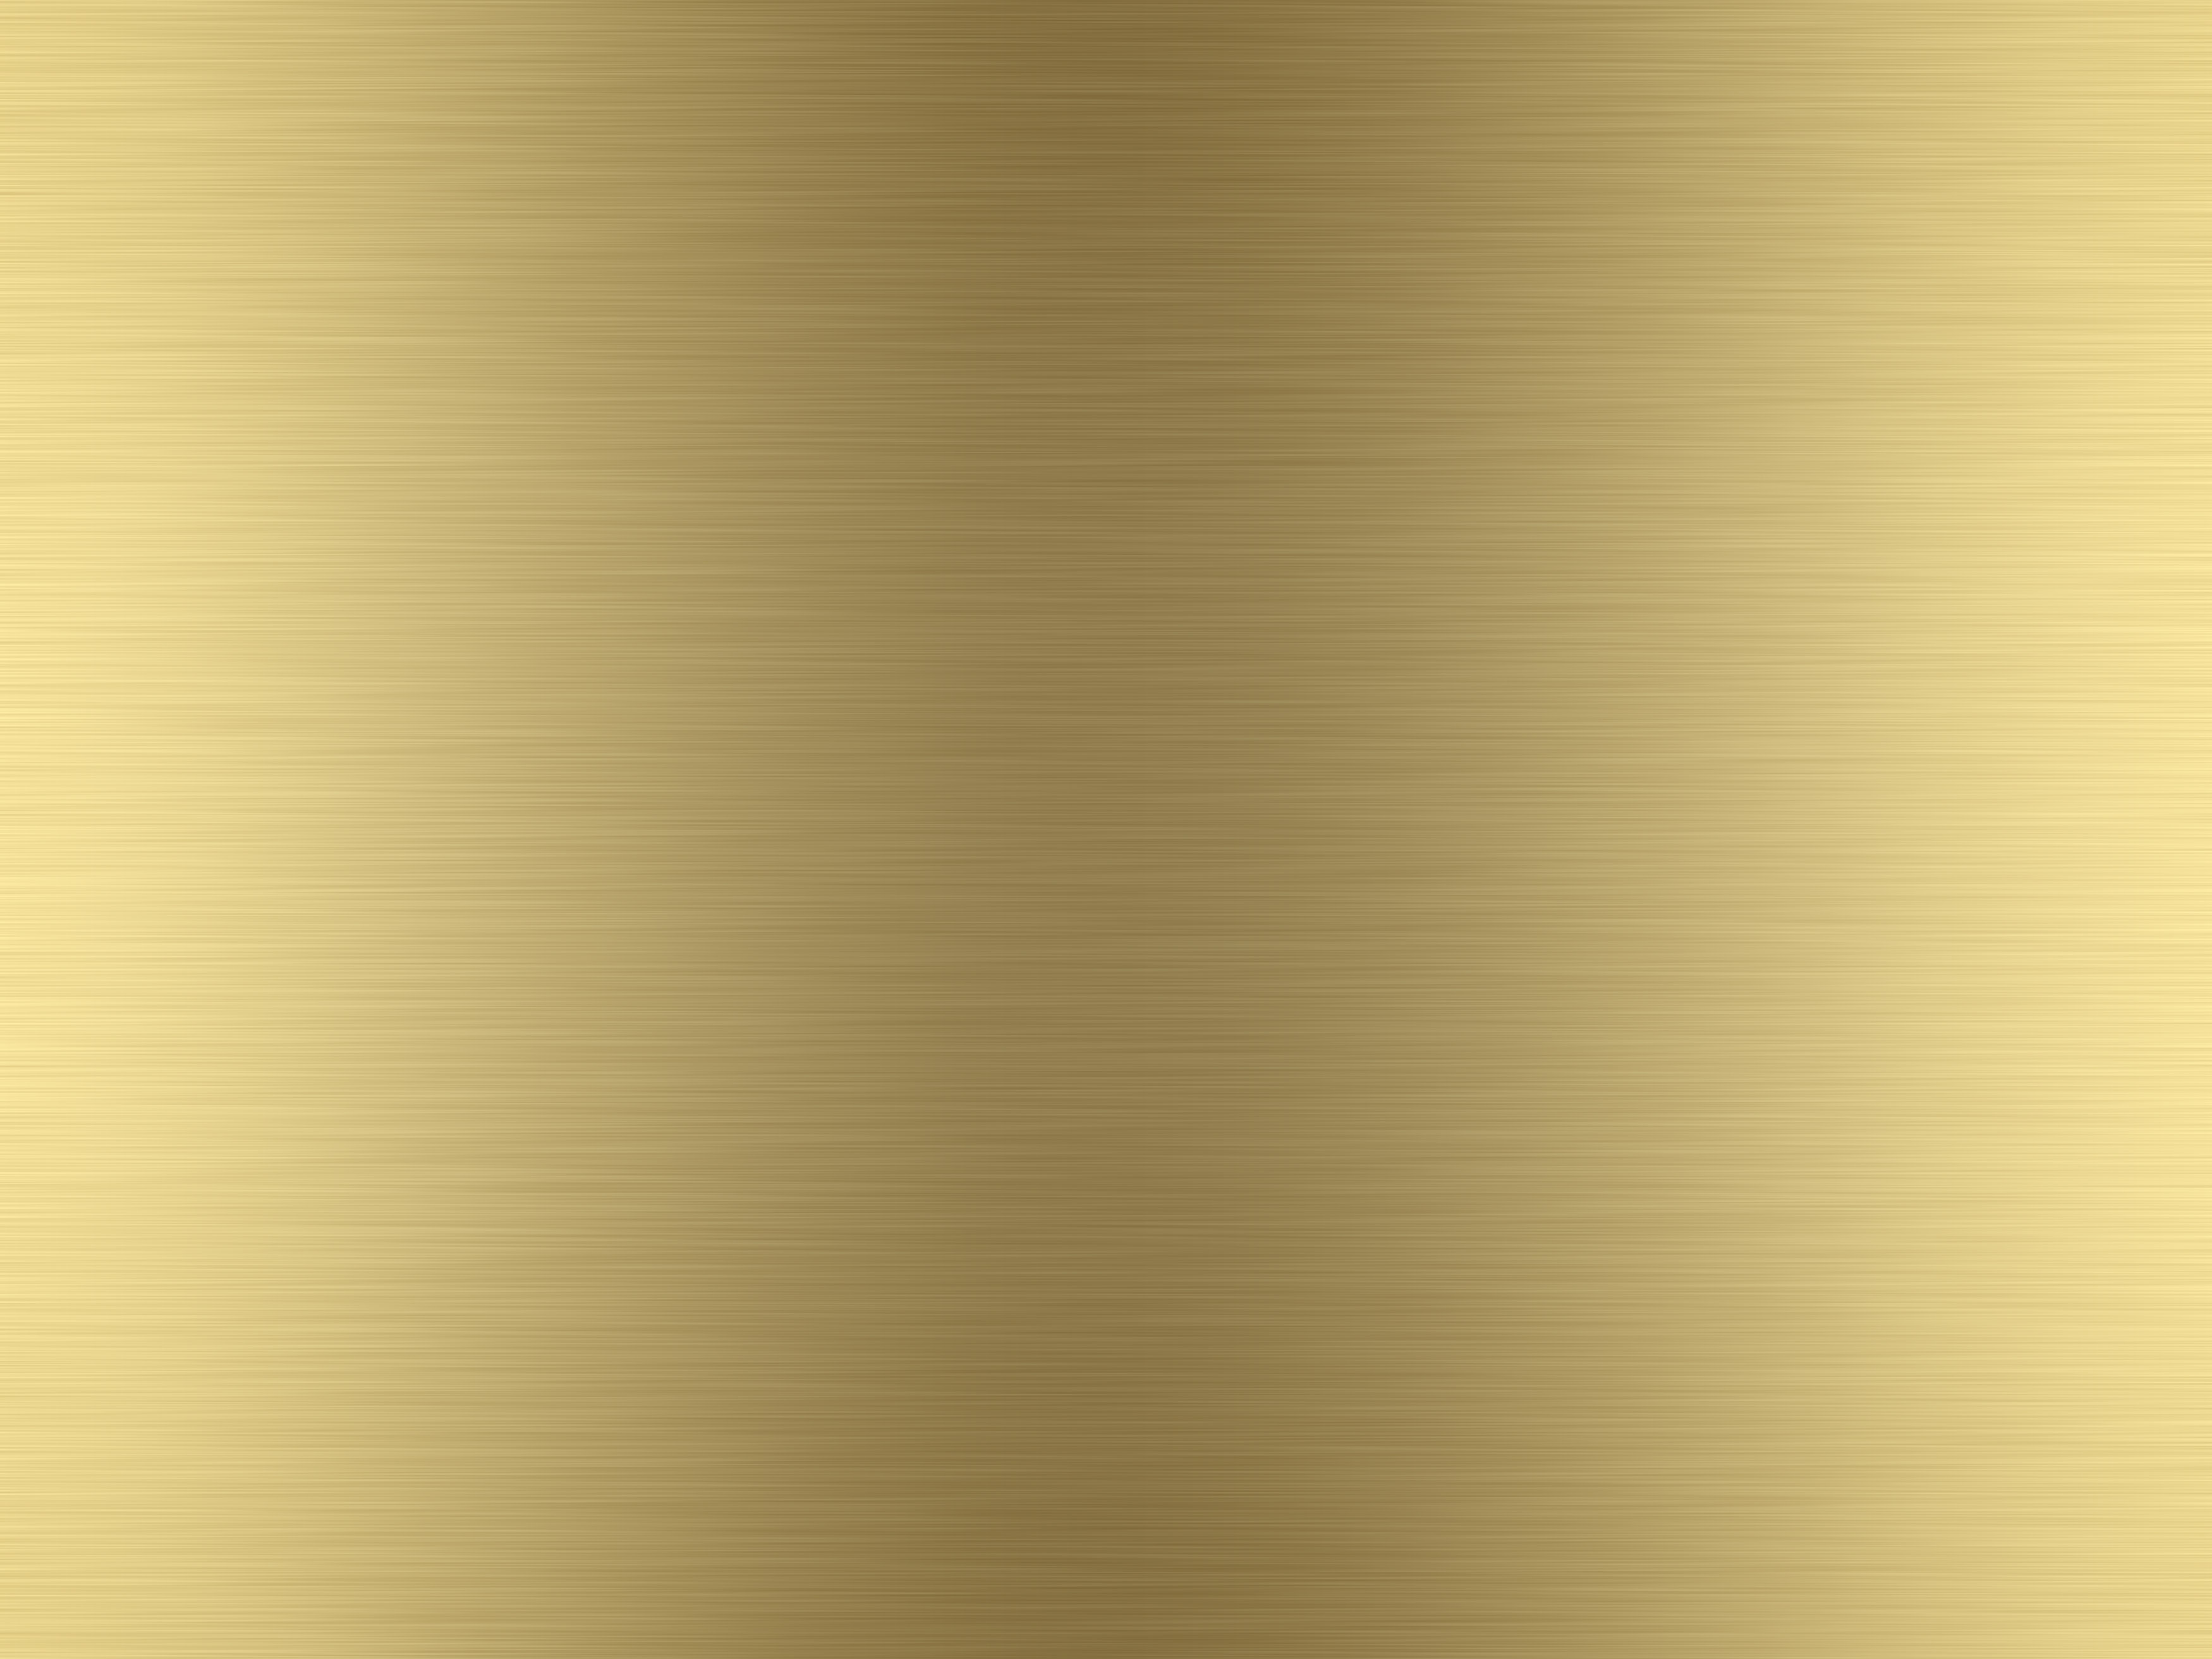 rendered lightly brushed gold background texture